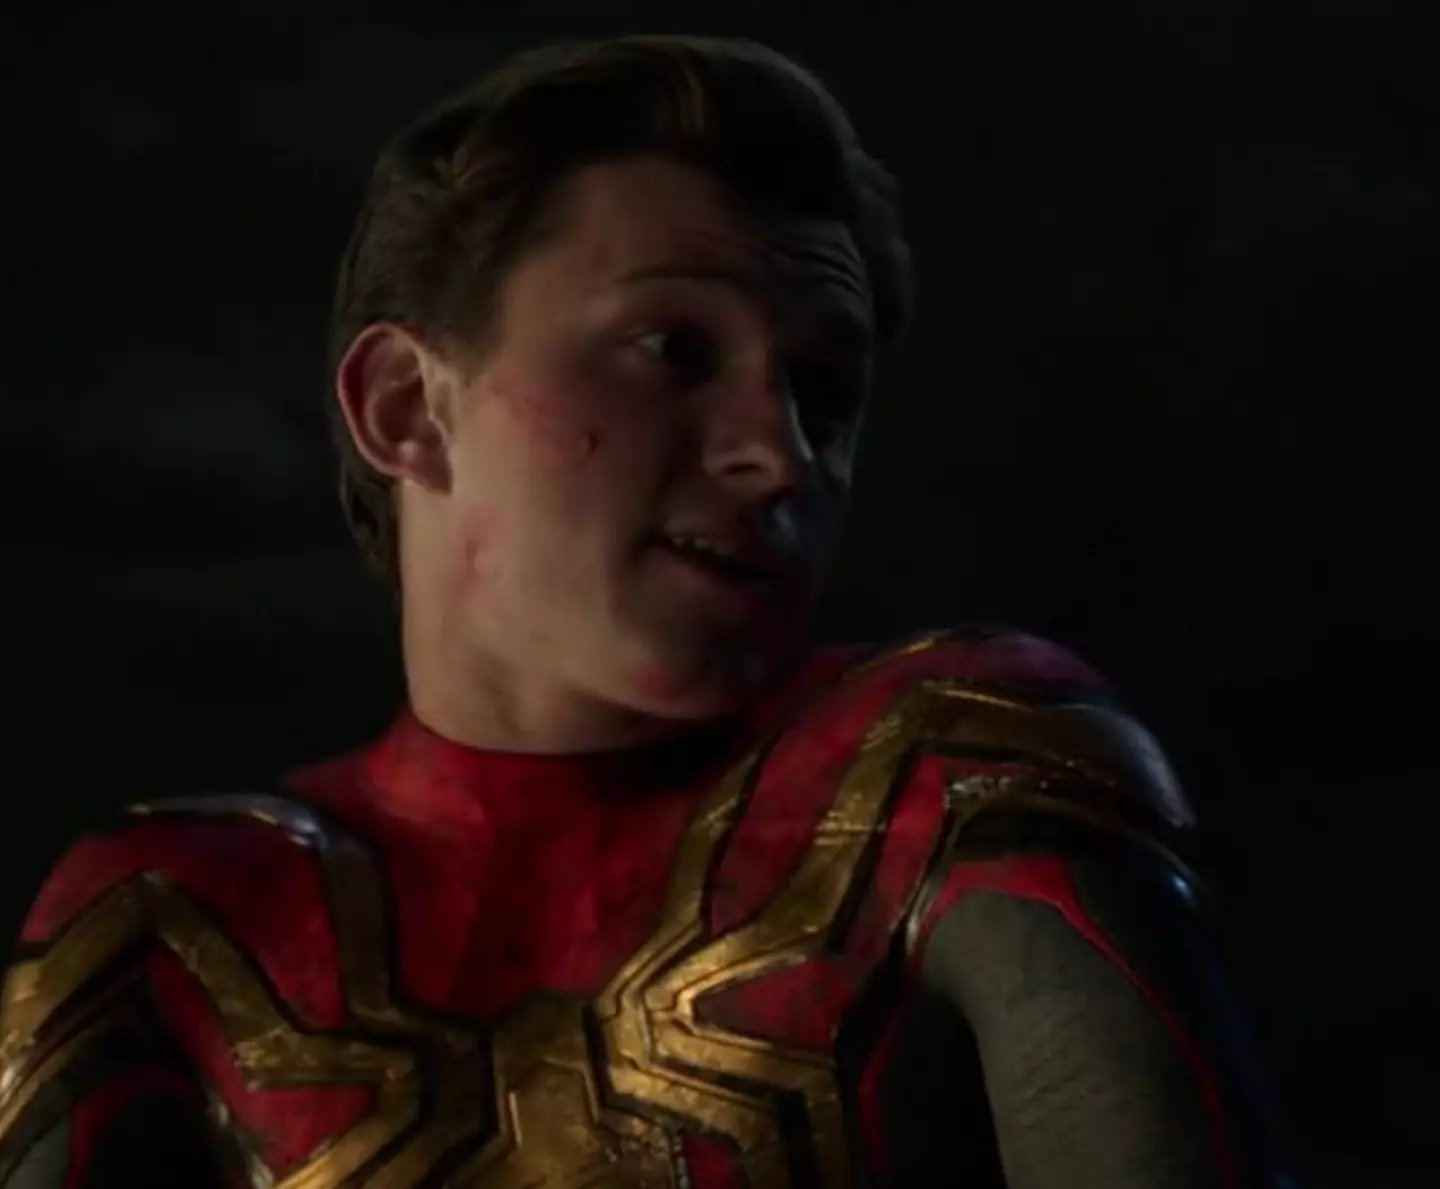 Tom Holland last played Spider-Man in No Way Home.